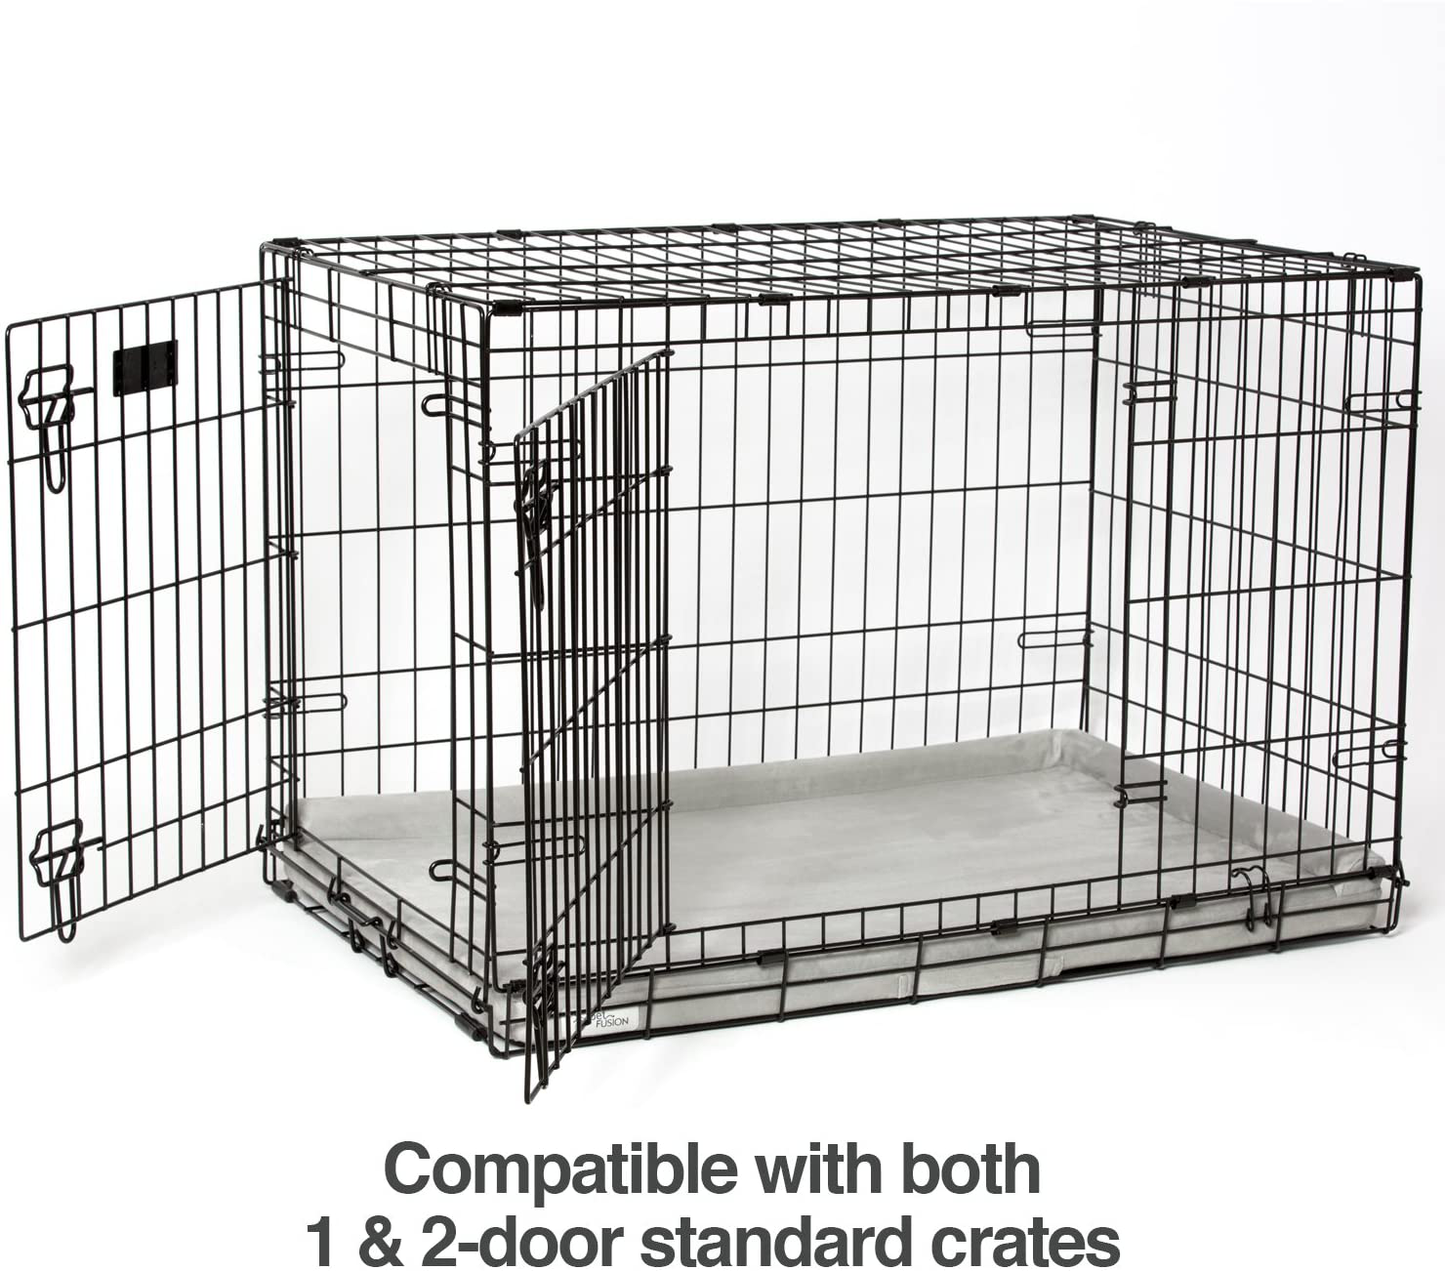 Petfusion Puppychoice Dog Crate Bed | Durable Microsuede Cover, Solid Foam, Waterproof Liner | Removable Washable Crate Pad Cover. Replacements Covers & Blankets Also Avail | 1 Year Warr.